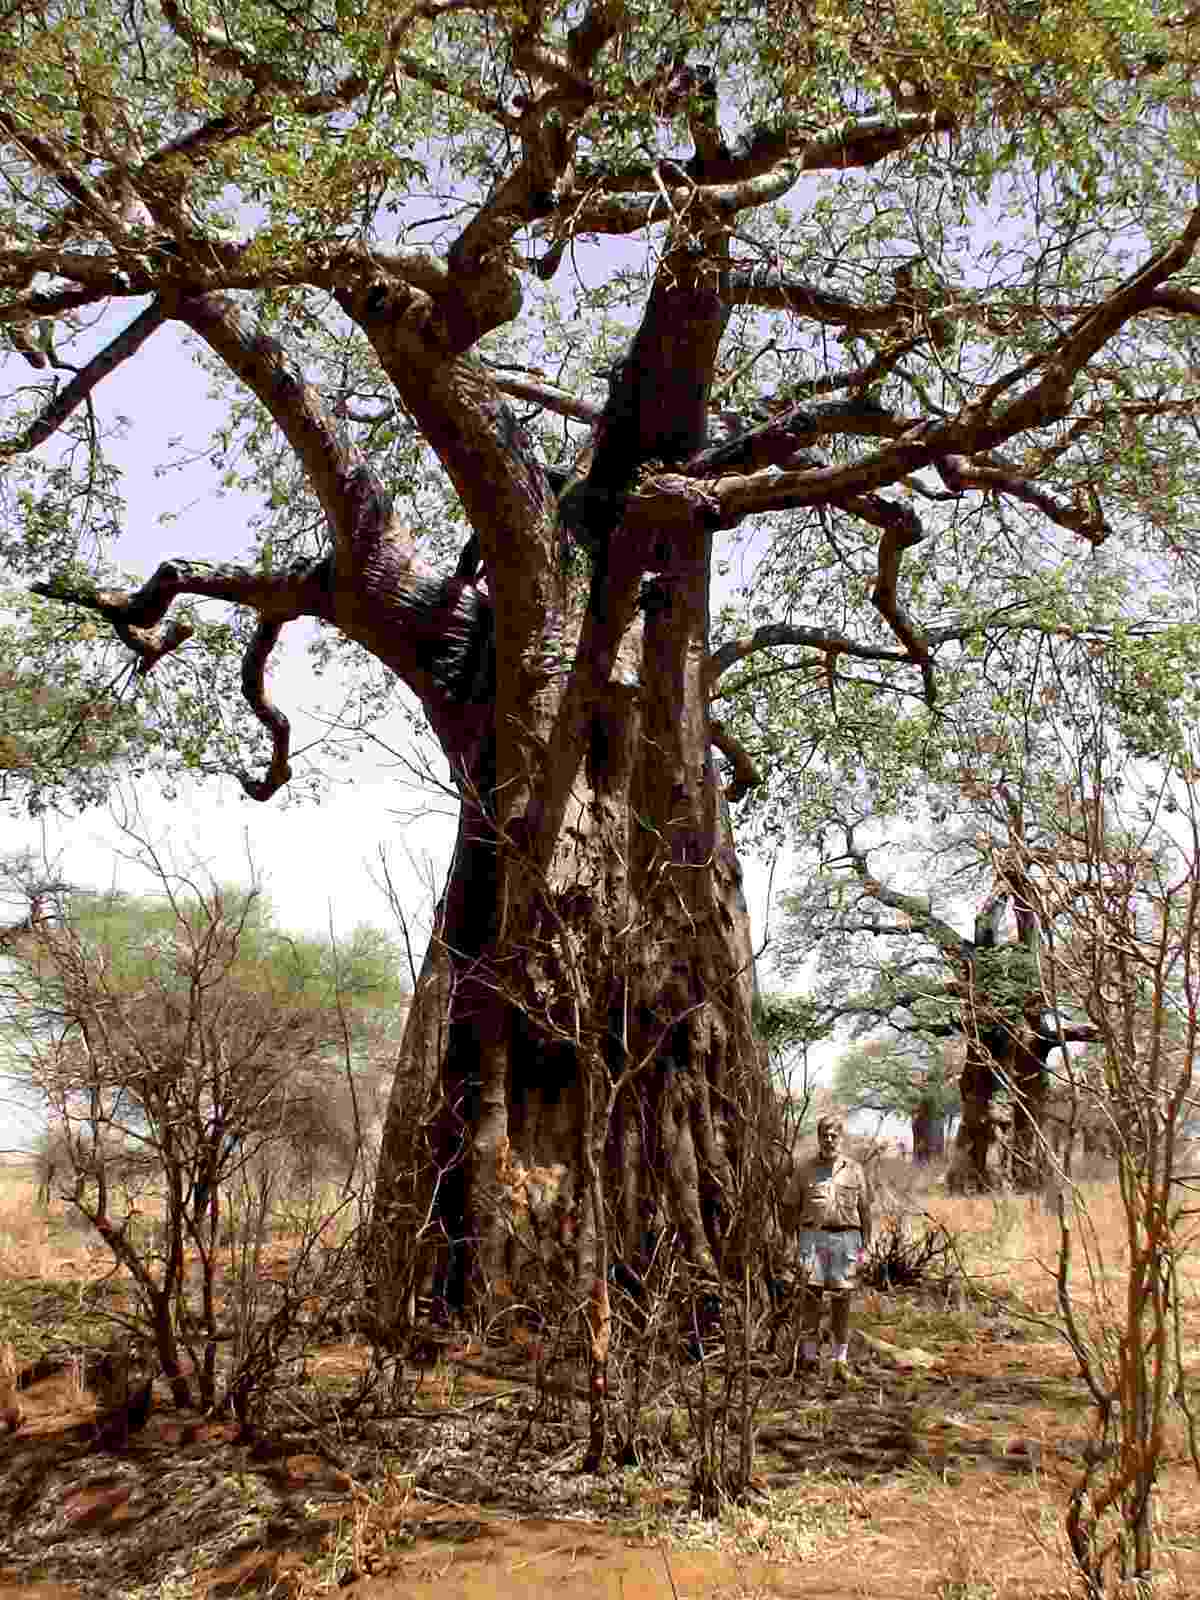 Jim stands next to a baobab tree